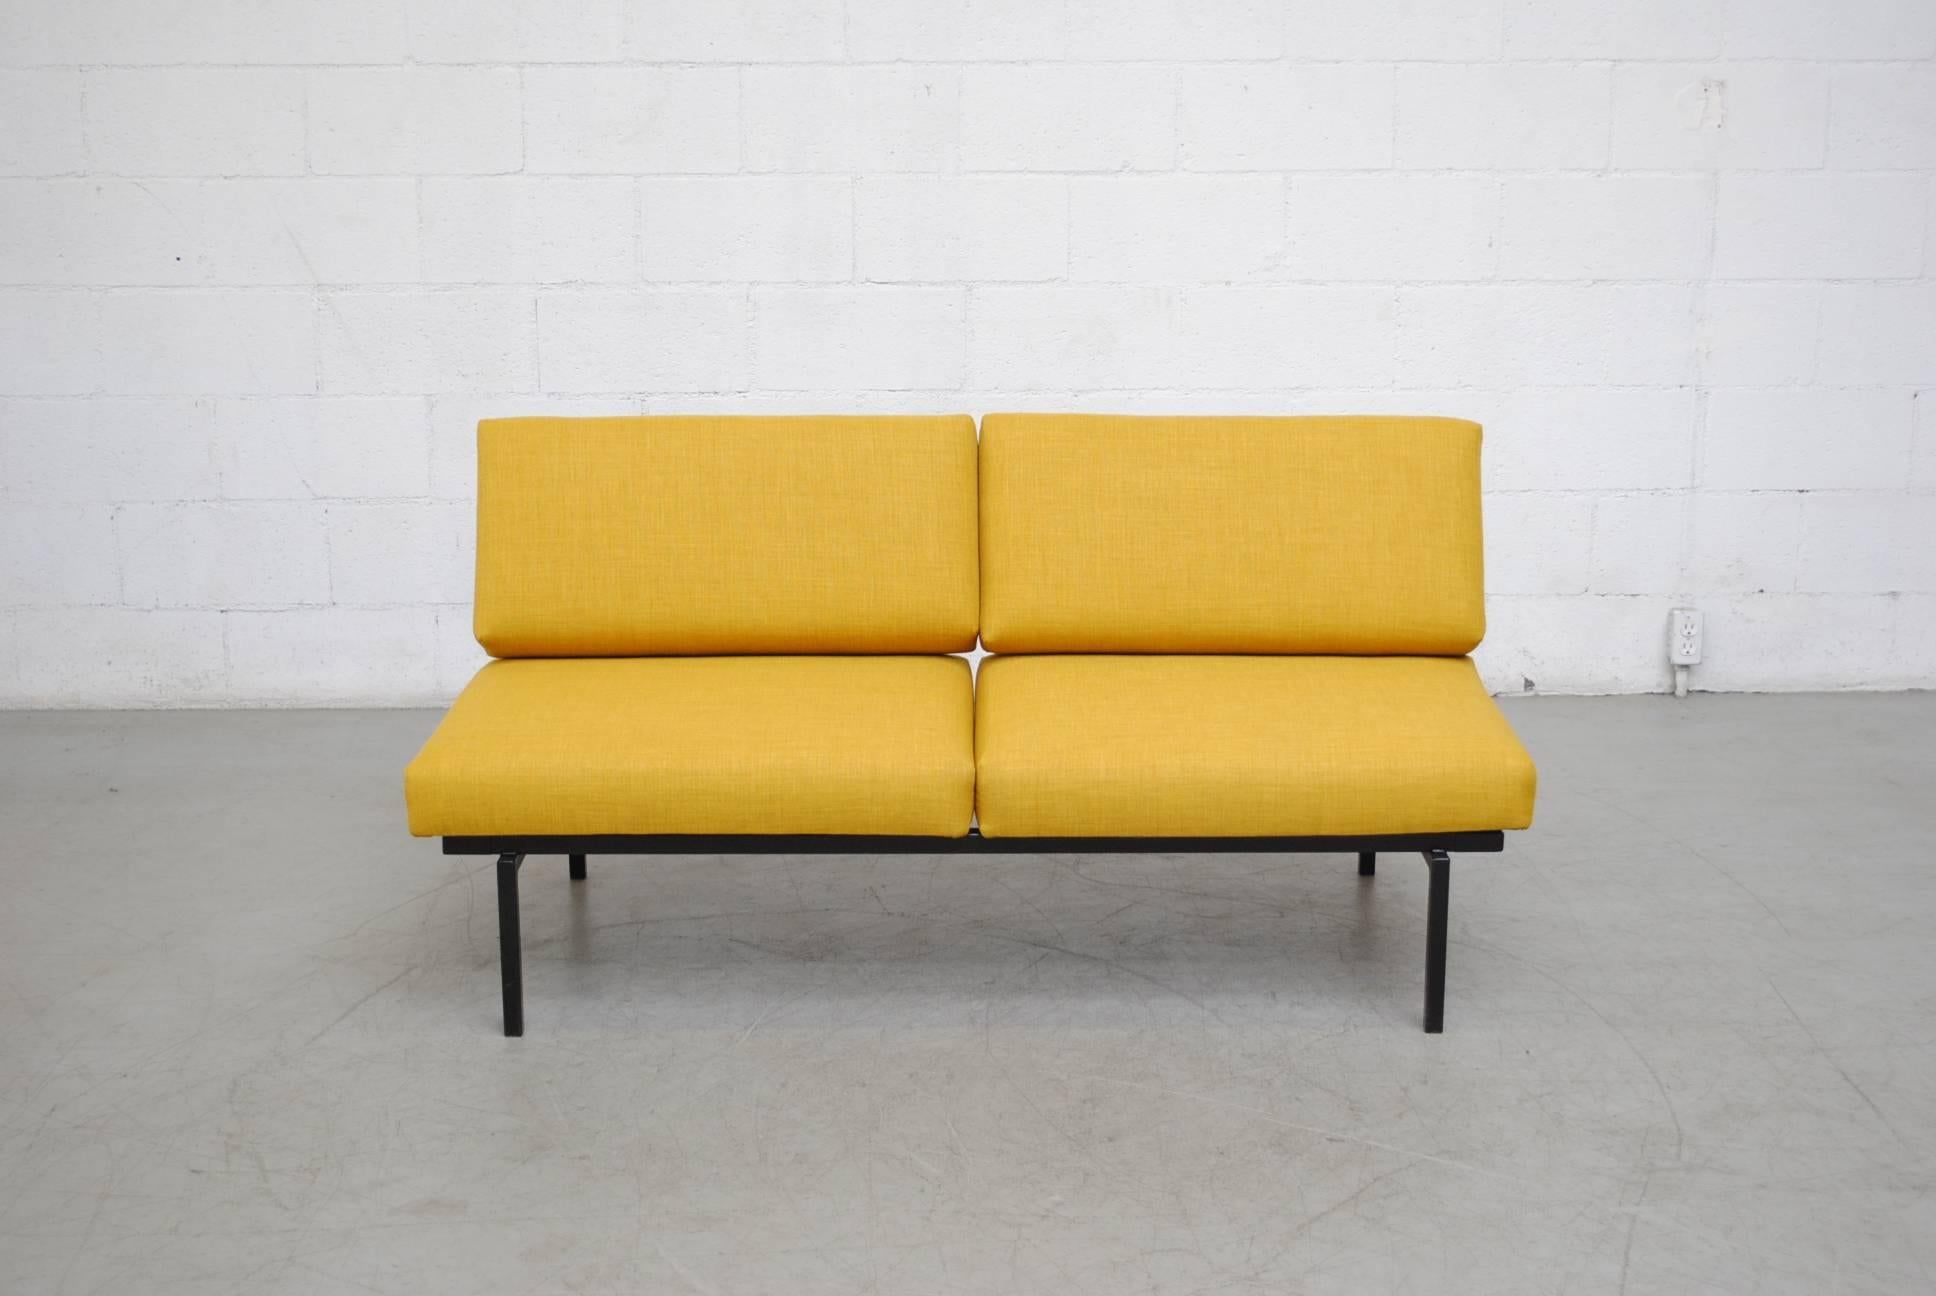 Coen de Vries sofa - daybed newly upholstered in sunshine yellow fabric. Black enameled metal frame. Easily transforms from sofa to daybed as pictured. Very good original condition. When unfolded as a daybed it measures 88.25 x 31.75 x 18?/26.125.